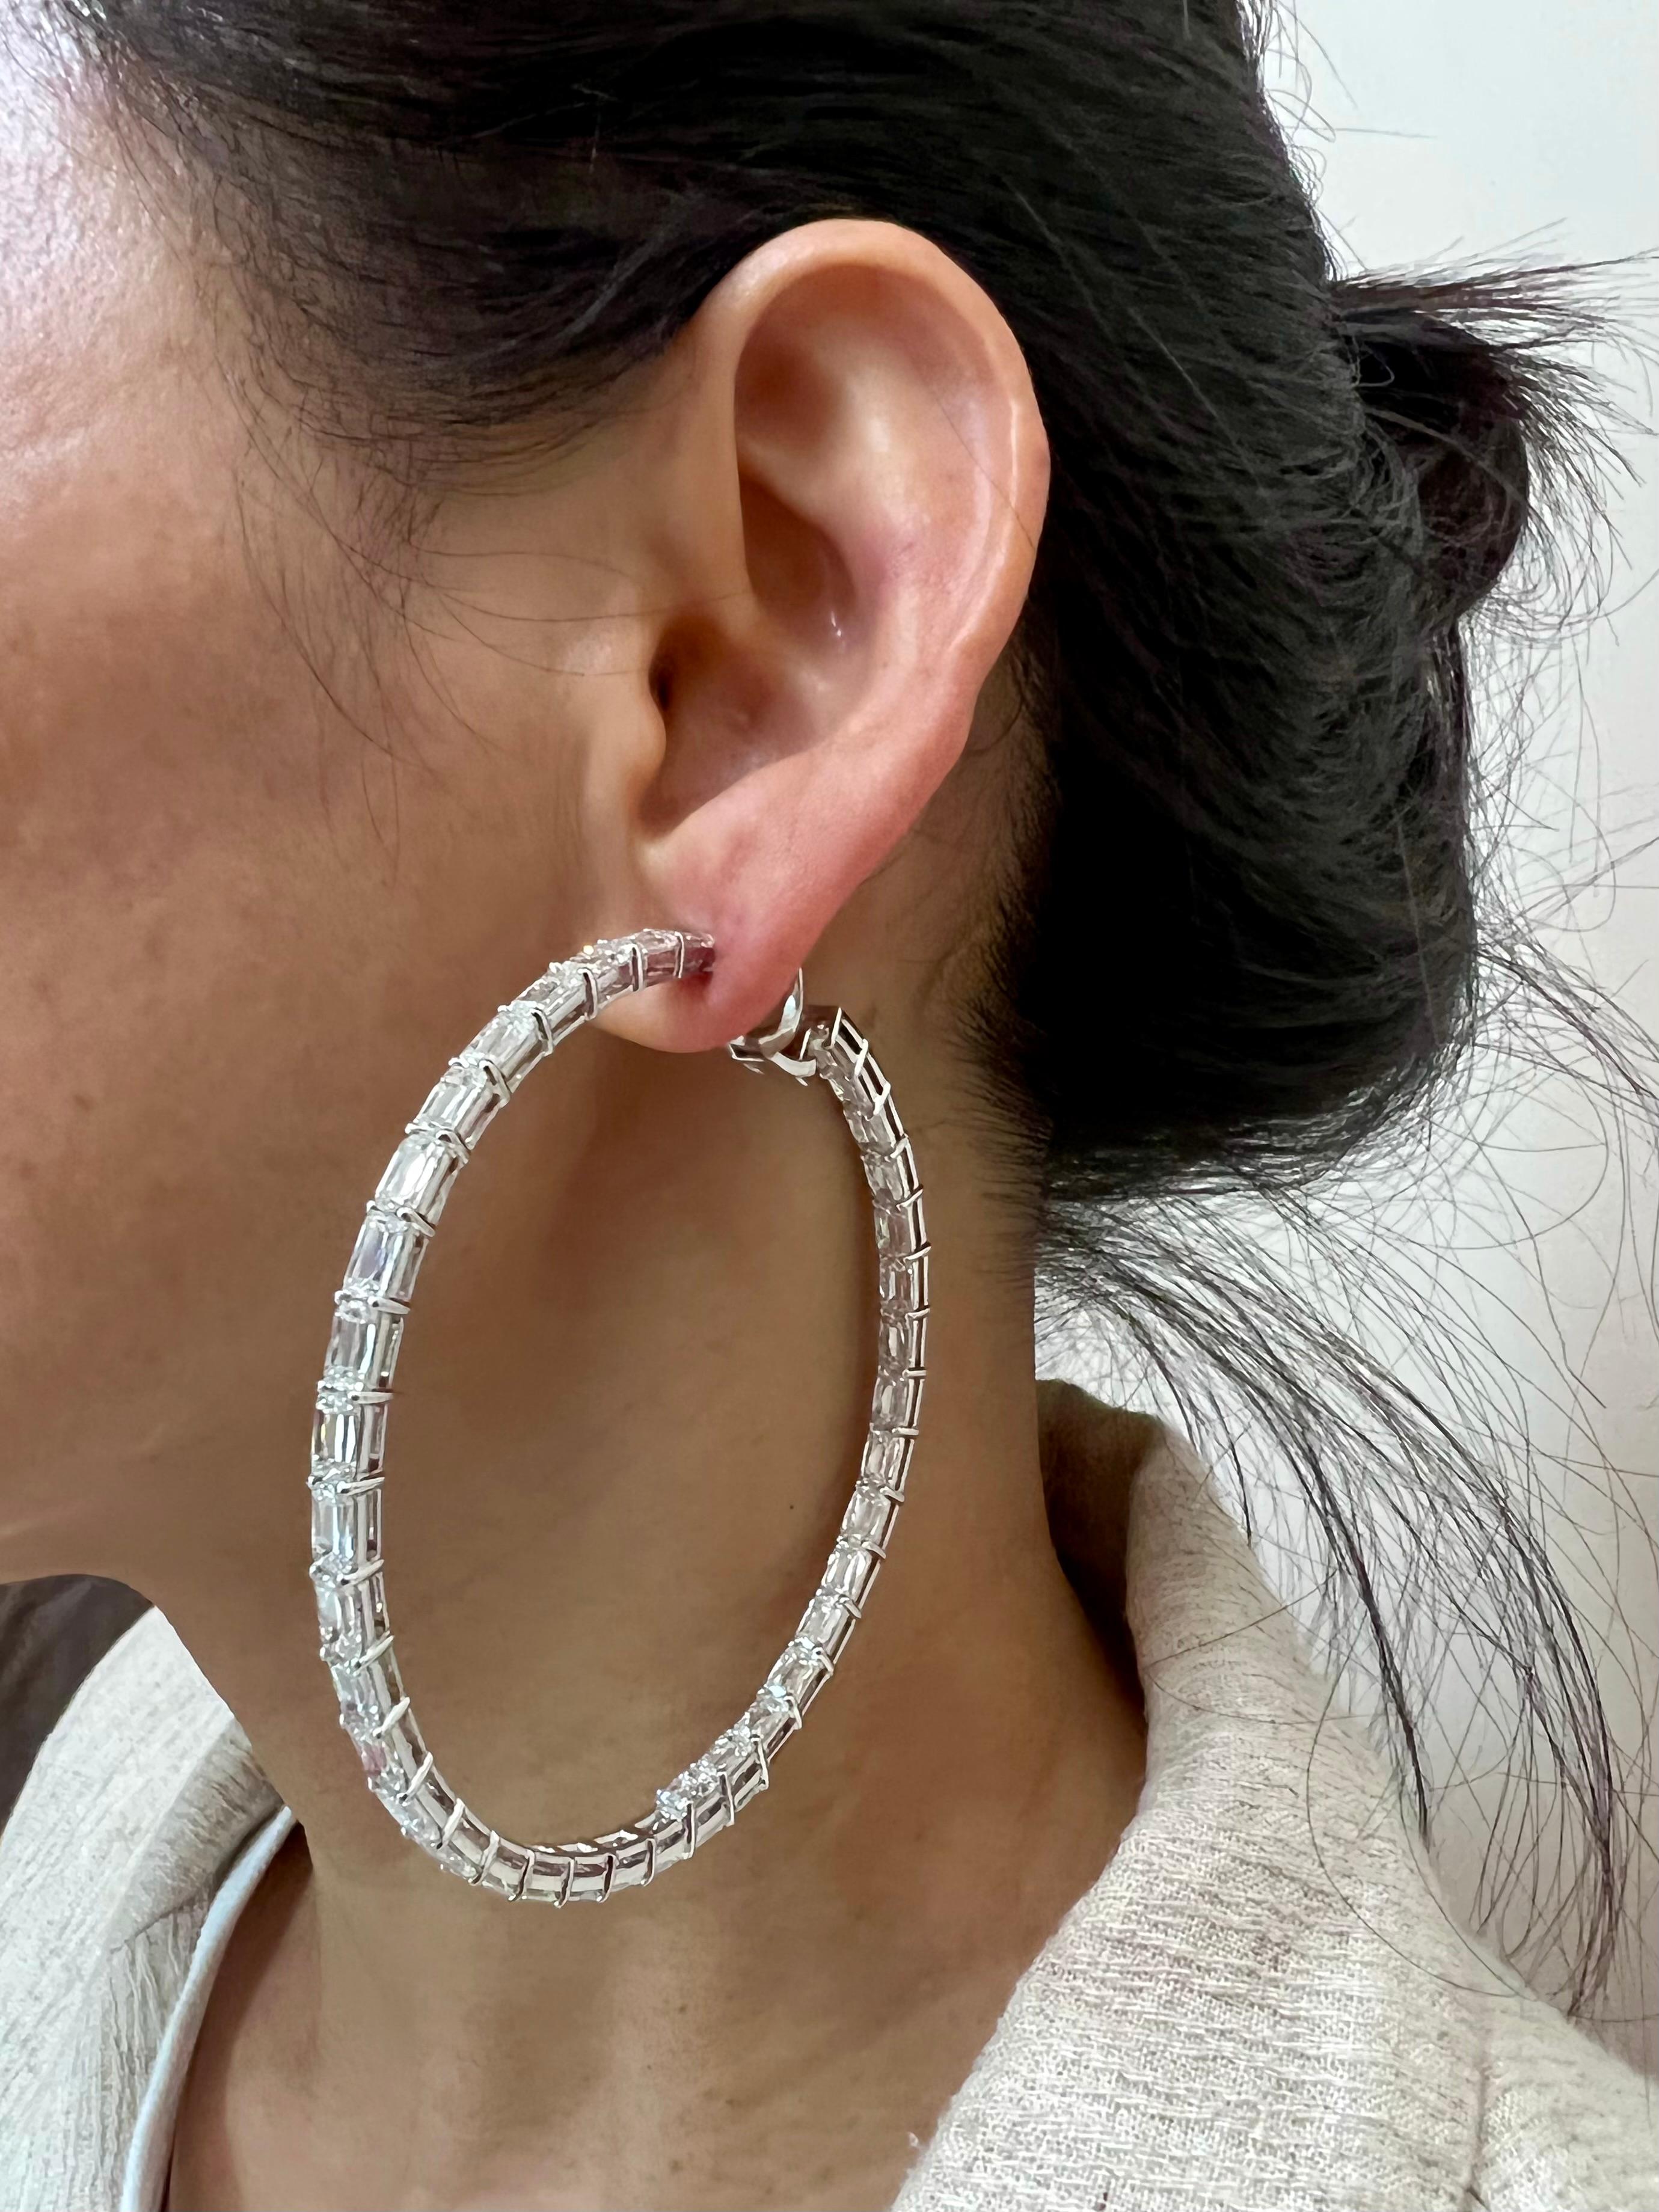 Please check out the HD video. This is a very special pair of diamond hoop earrings. It took a very long time to match and assemble these impressive earrings. 78 GIA certified Ashoka cut diamonds are mounted in this 18k white gold setting. There are